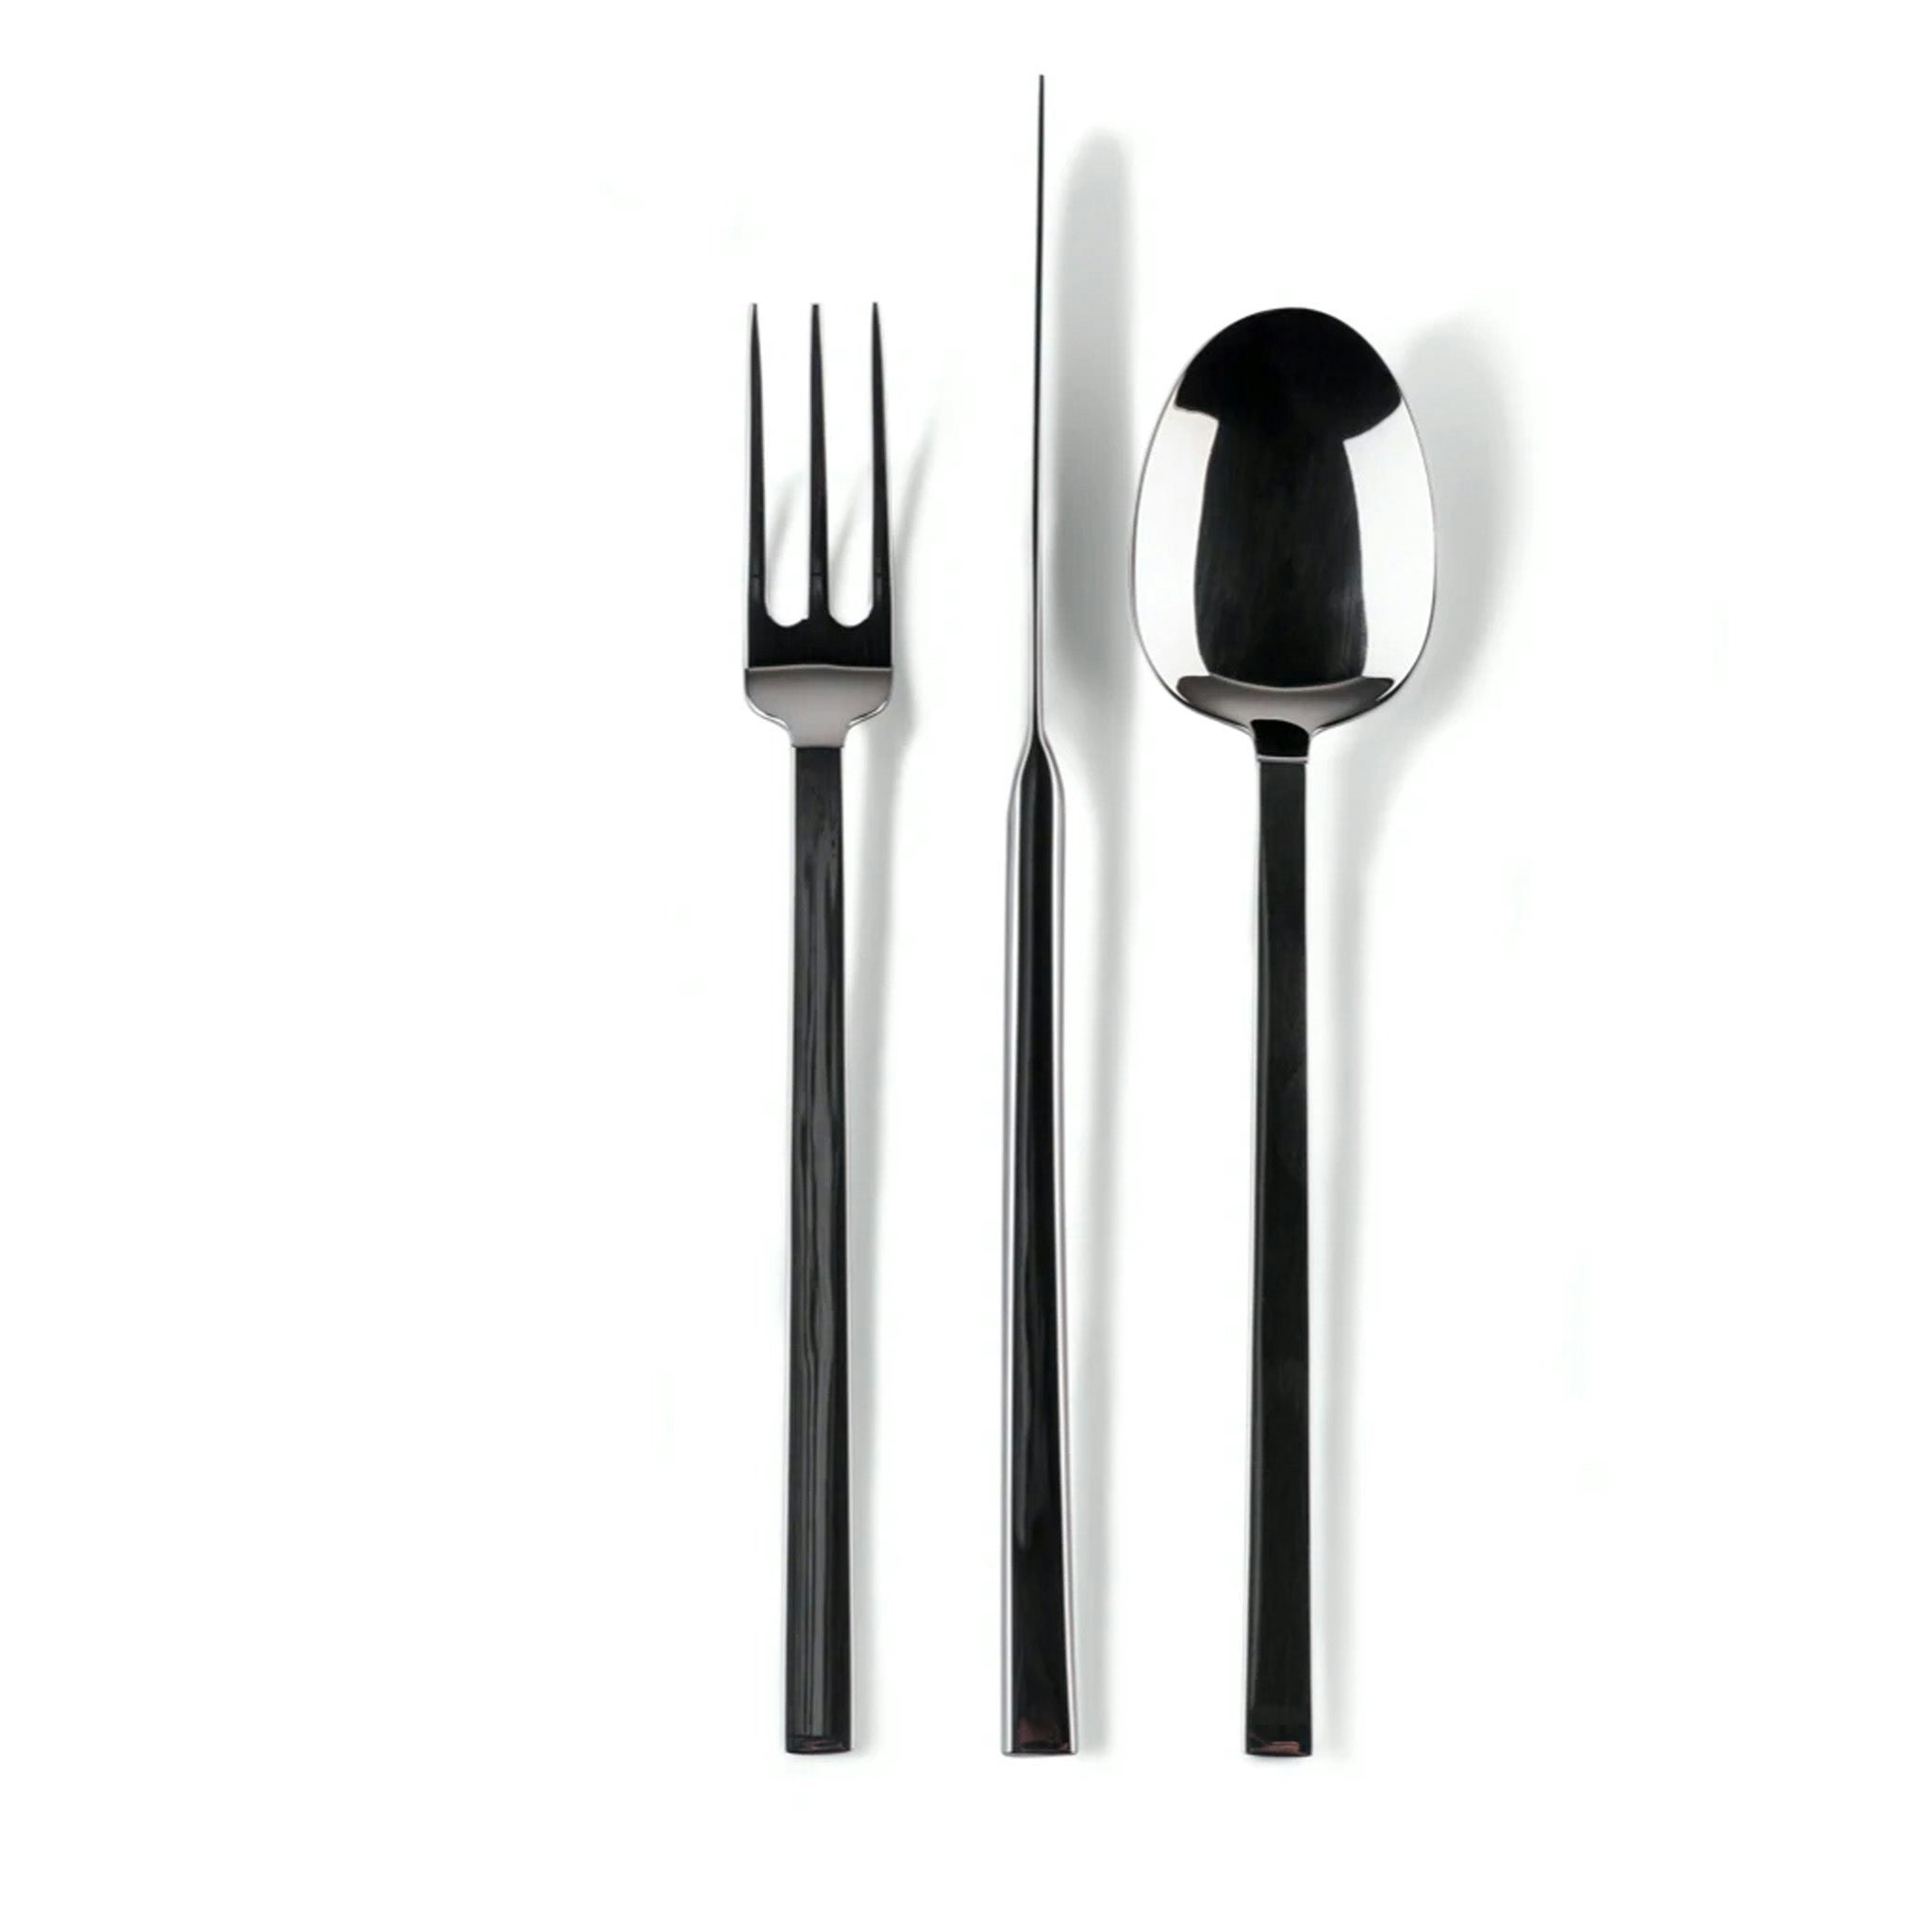 Cutlery Set by John Pawson for When Objects Work